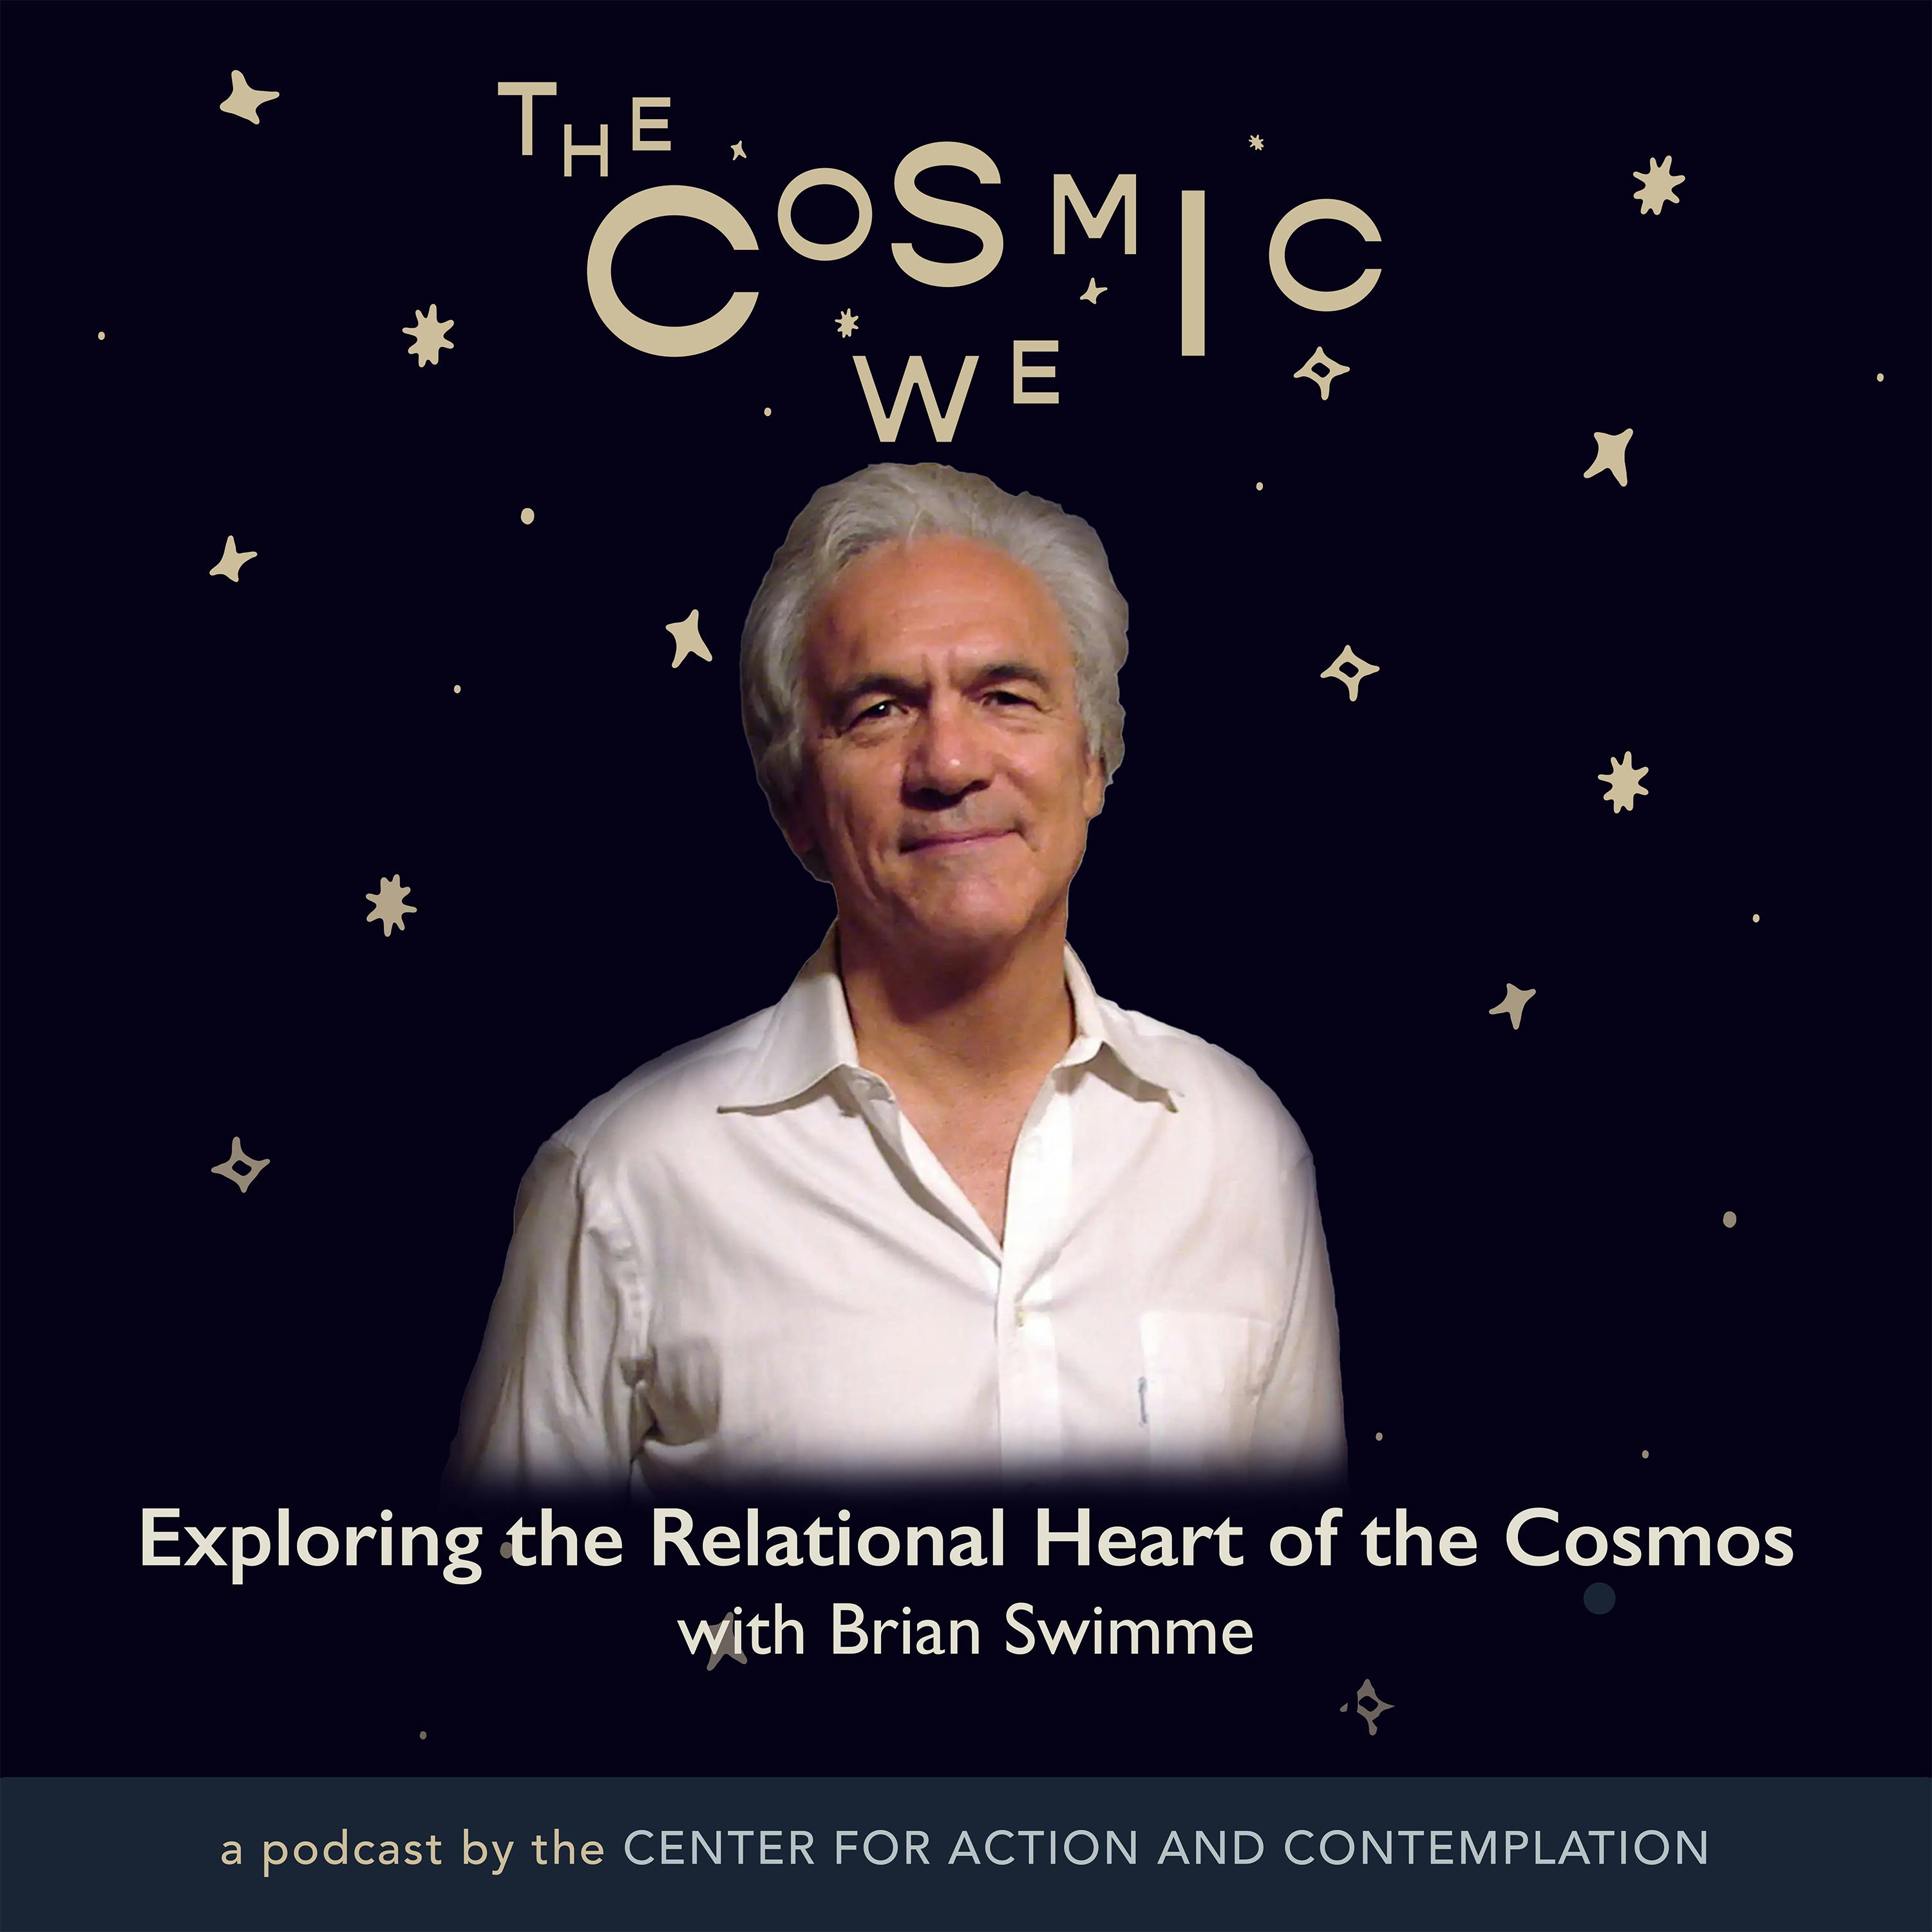 Exploring the Relational Heart of the Cosmos with Brian Swimme